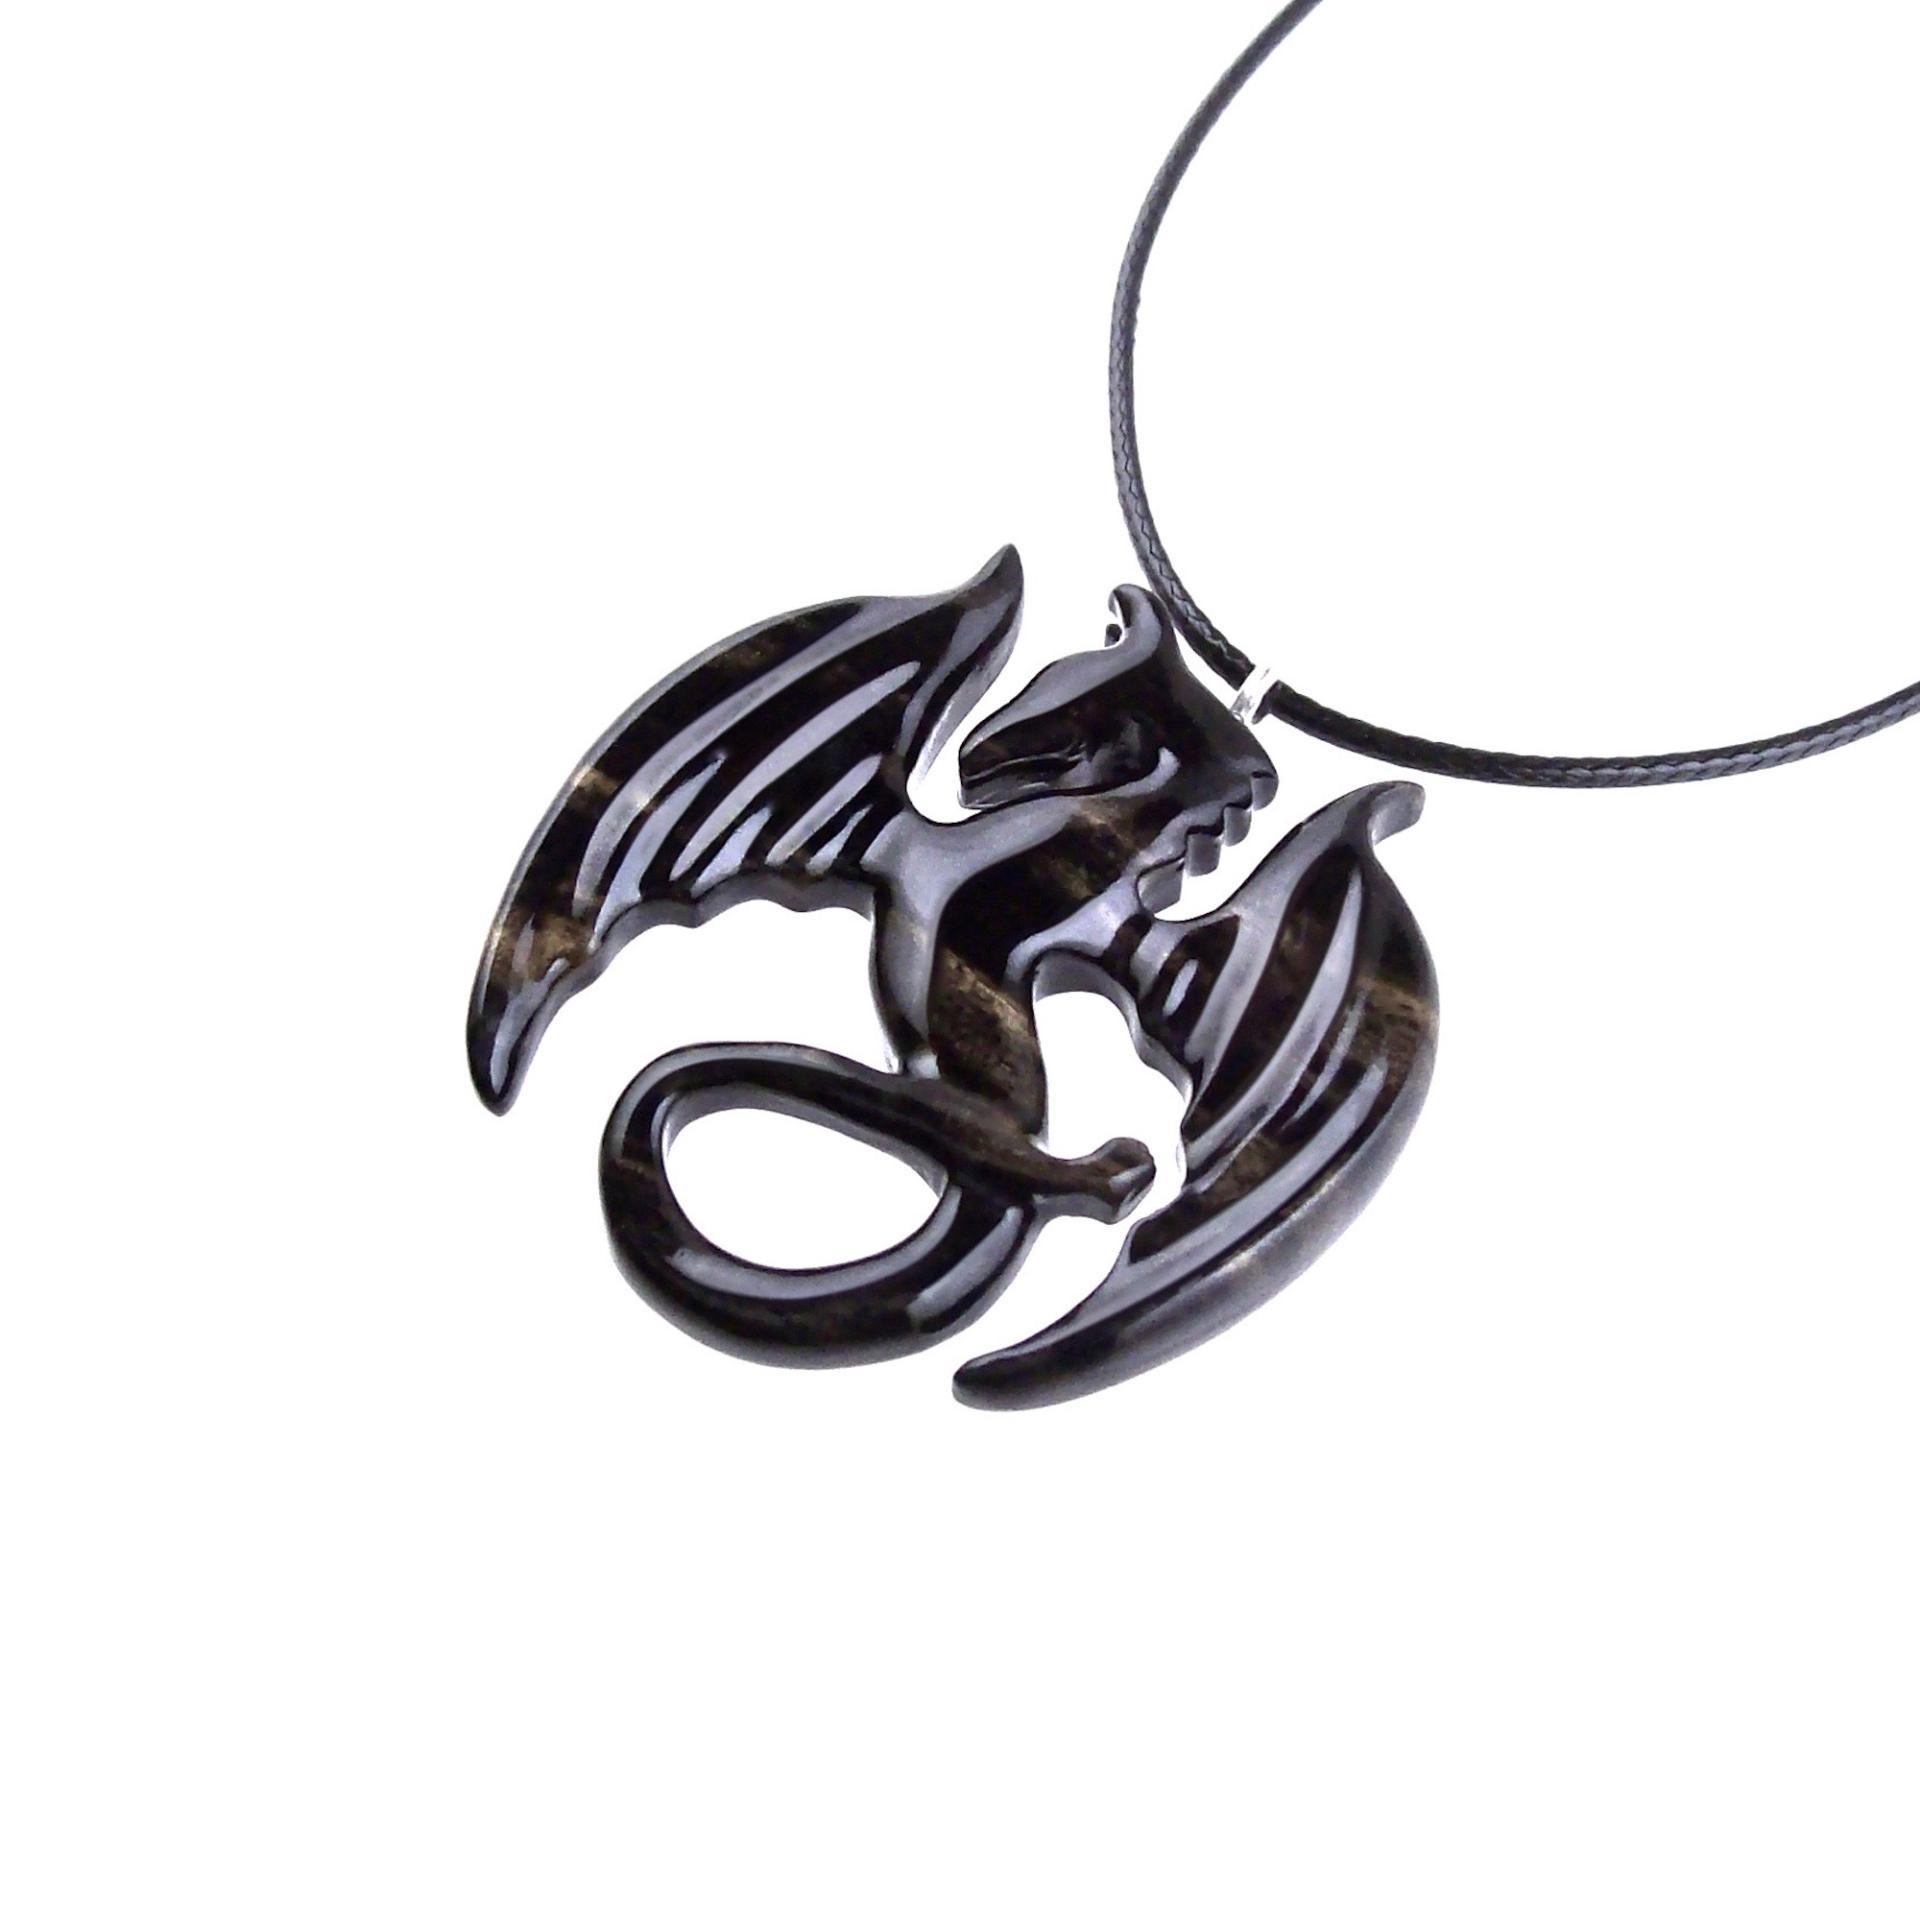 Dragon Necklace for Men Women, Hand Carved Wooden Dragon Pendant, Fantasy Wood Jewelry Gift for Her Him